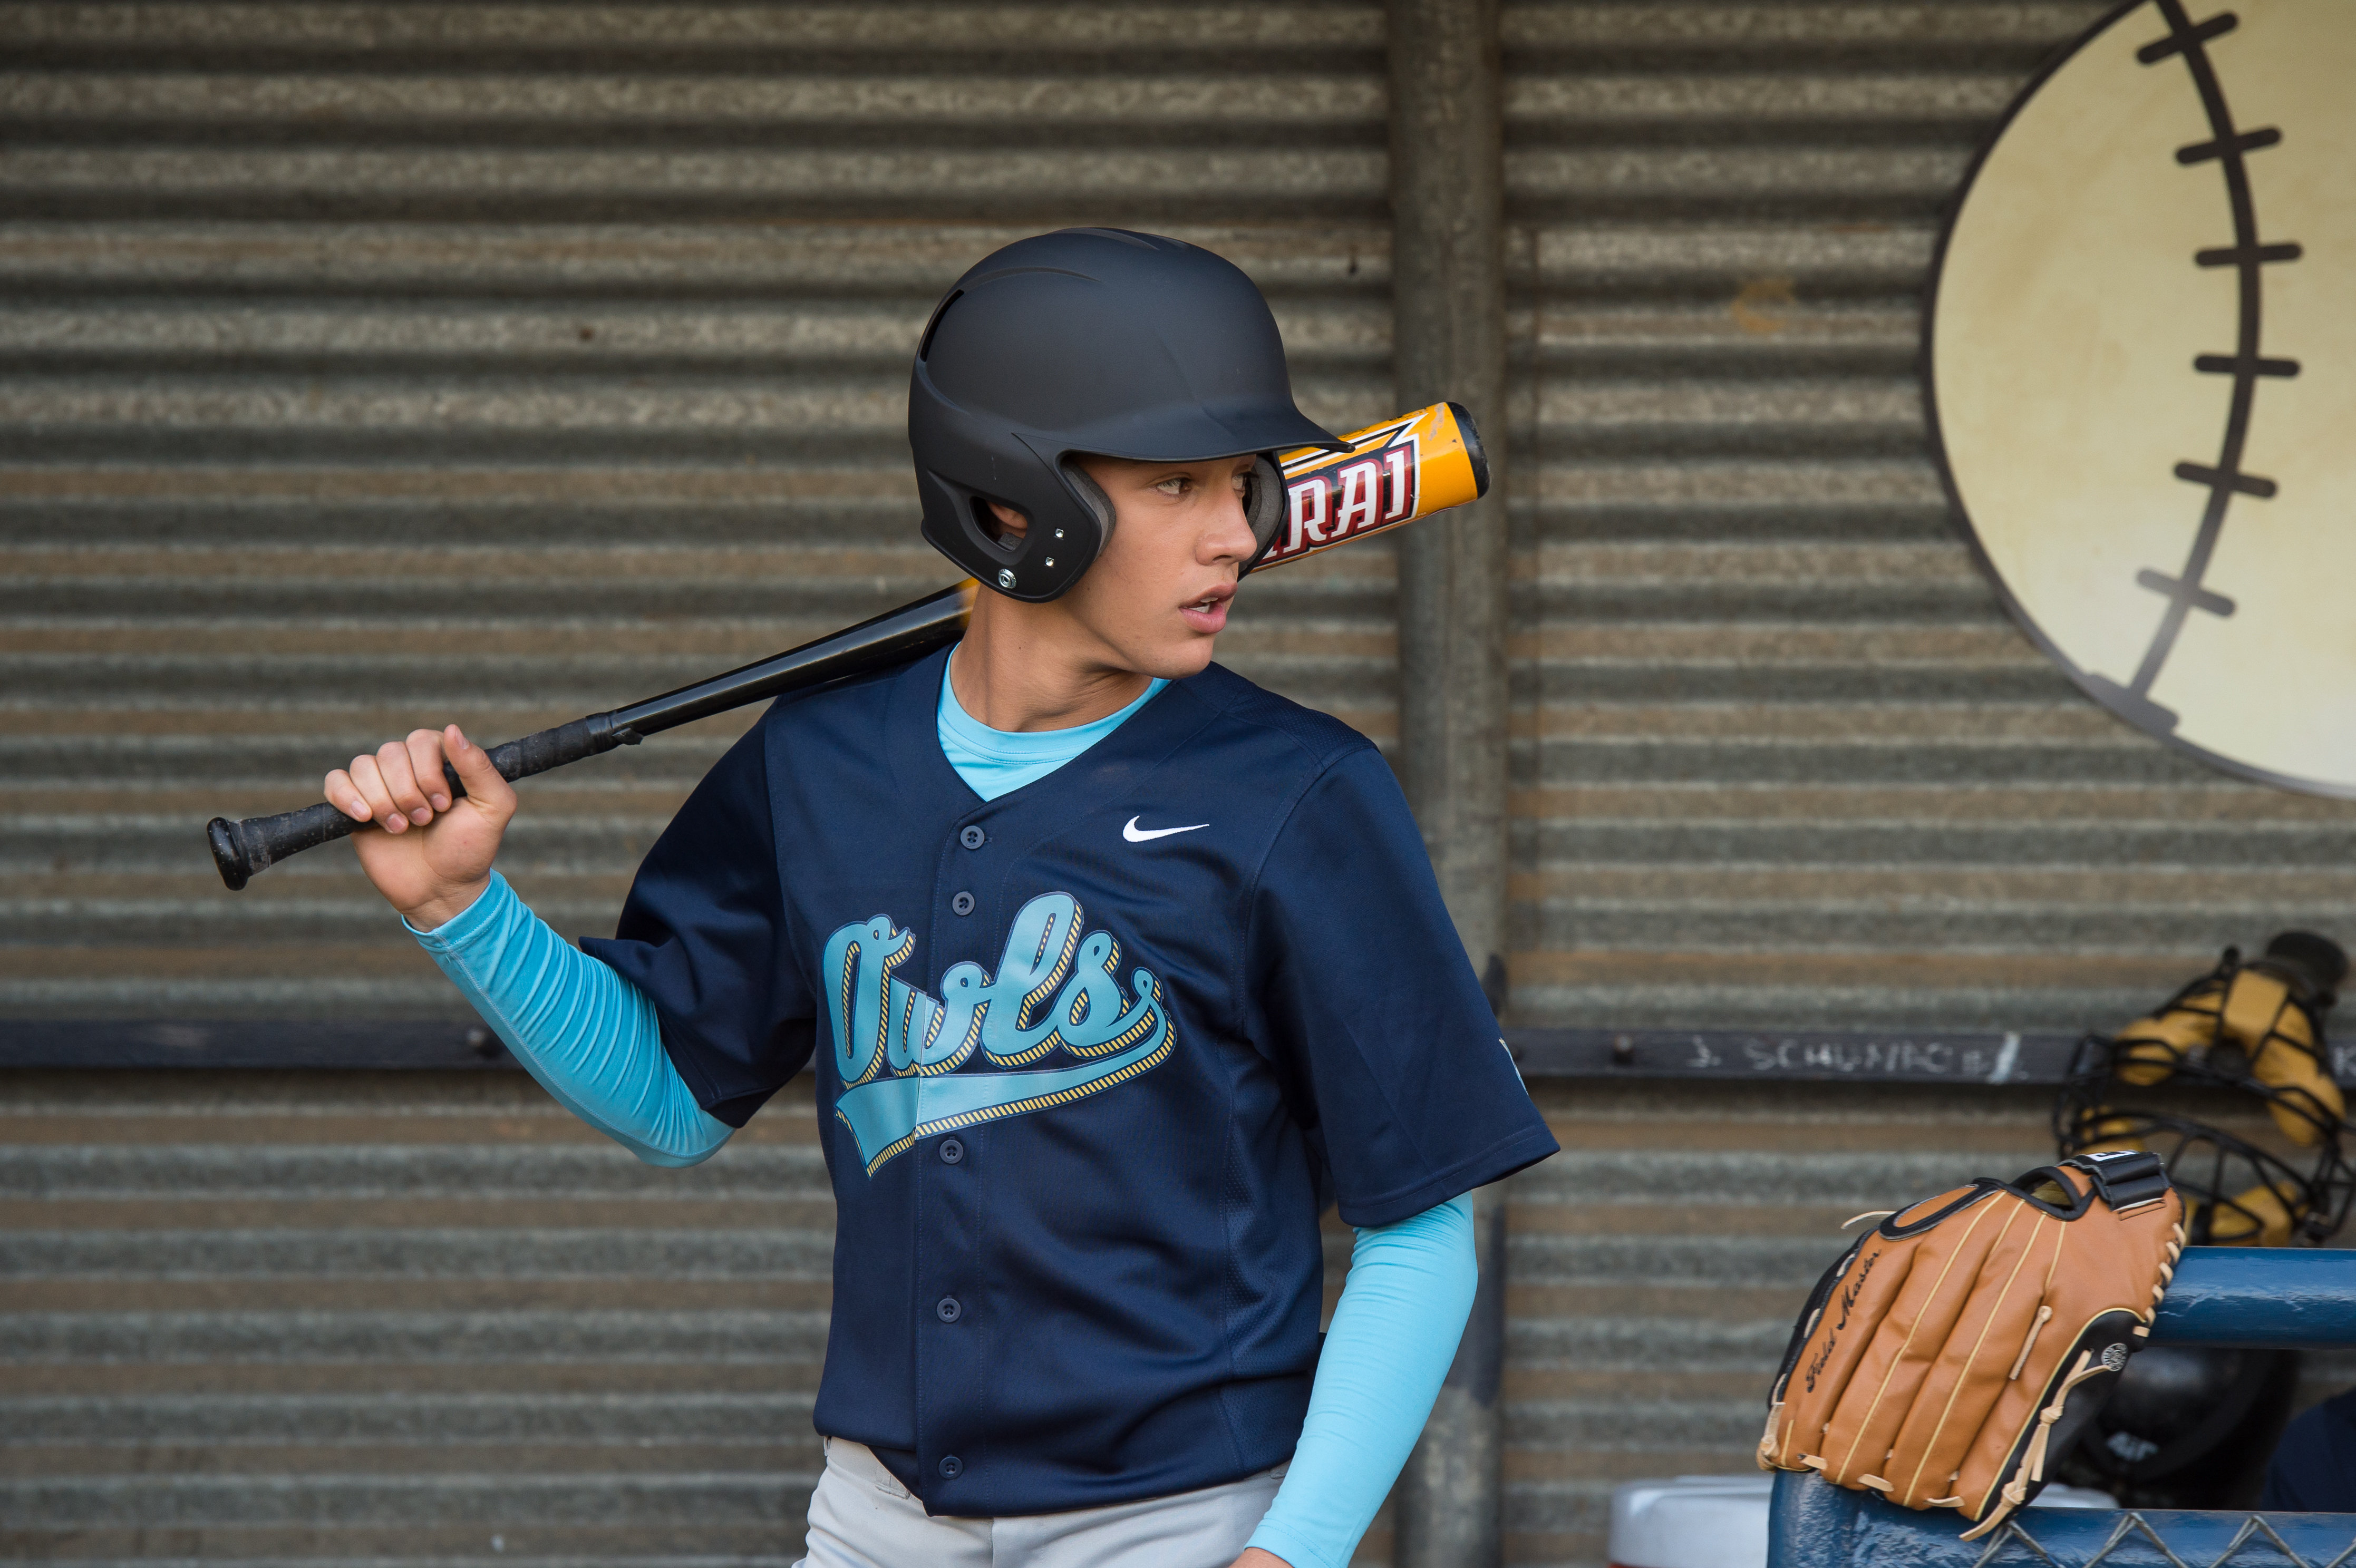 Frankie Payton (Cameron Dallas) gets ready to go to bat in The Outfield.